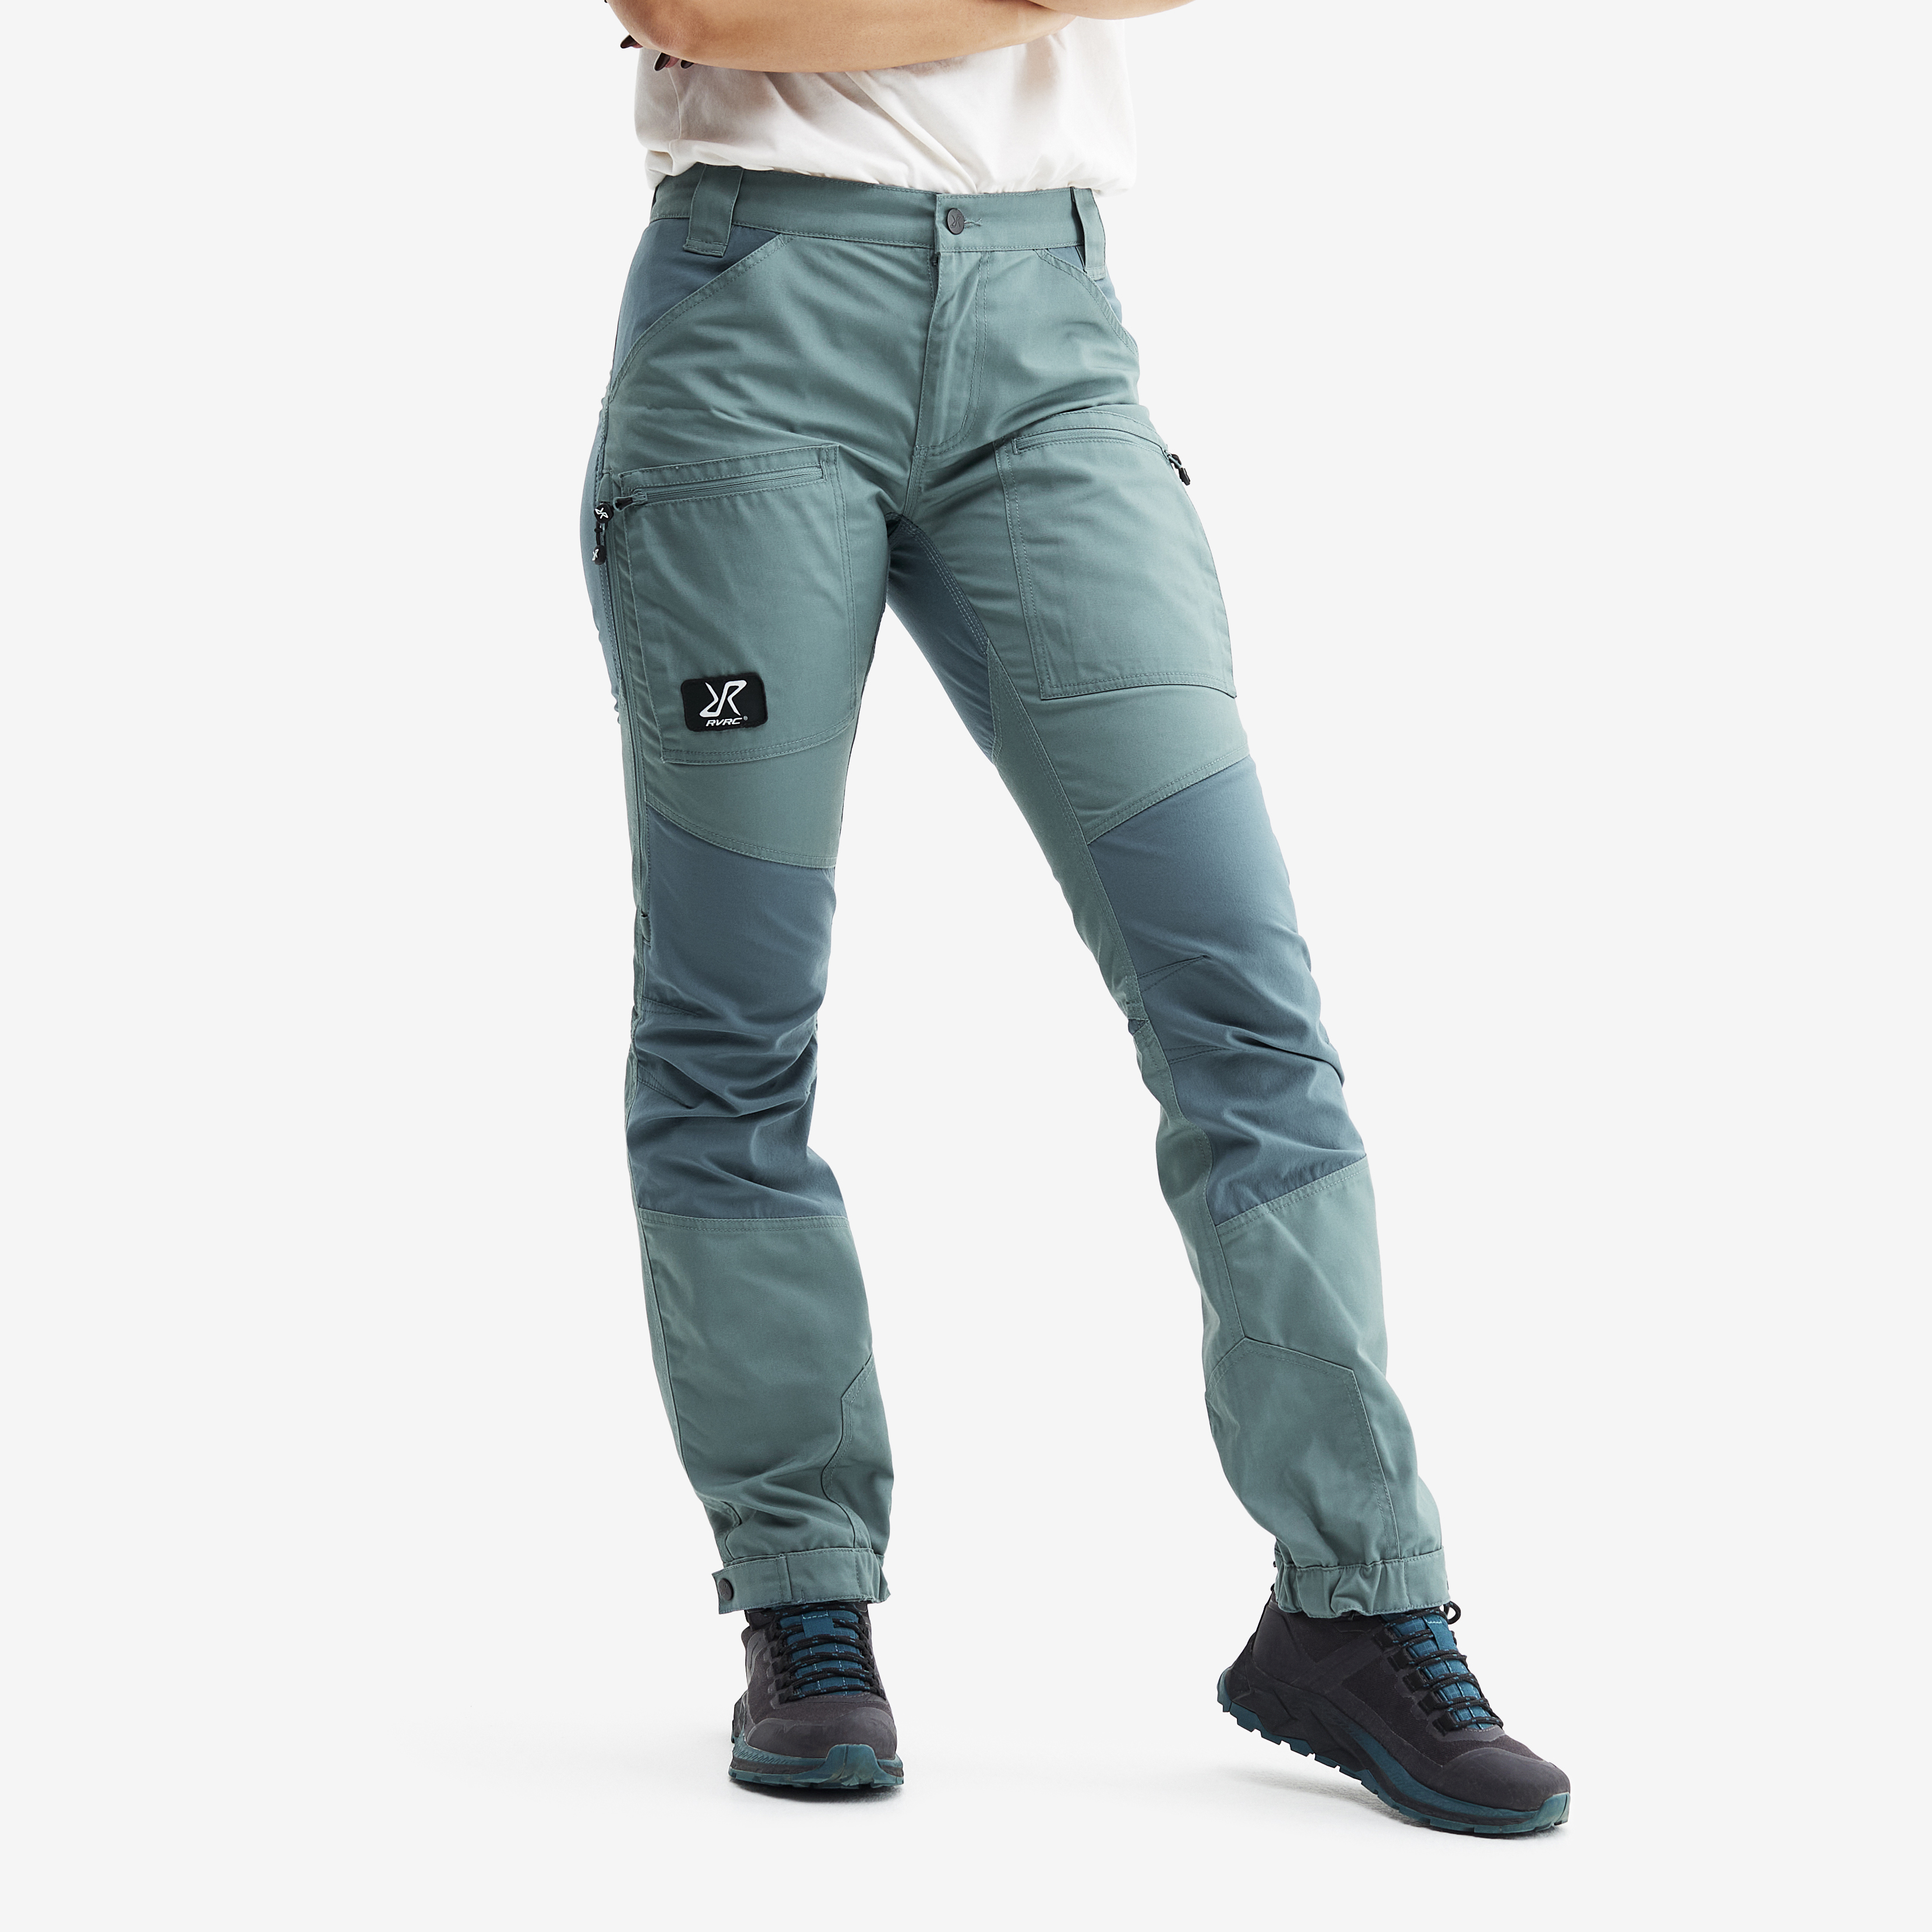 Nordwand Pro hiking pants for women in blue